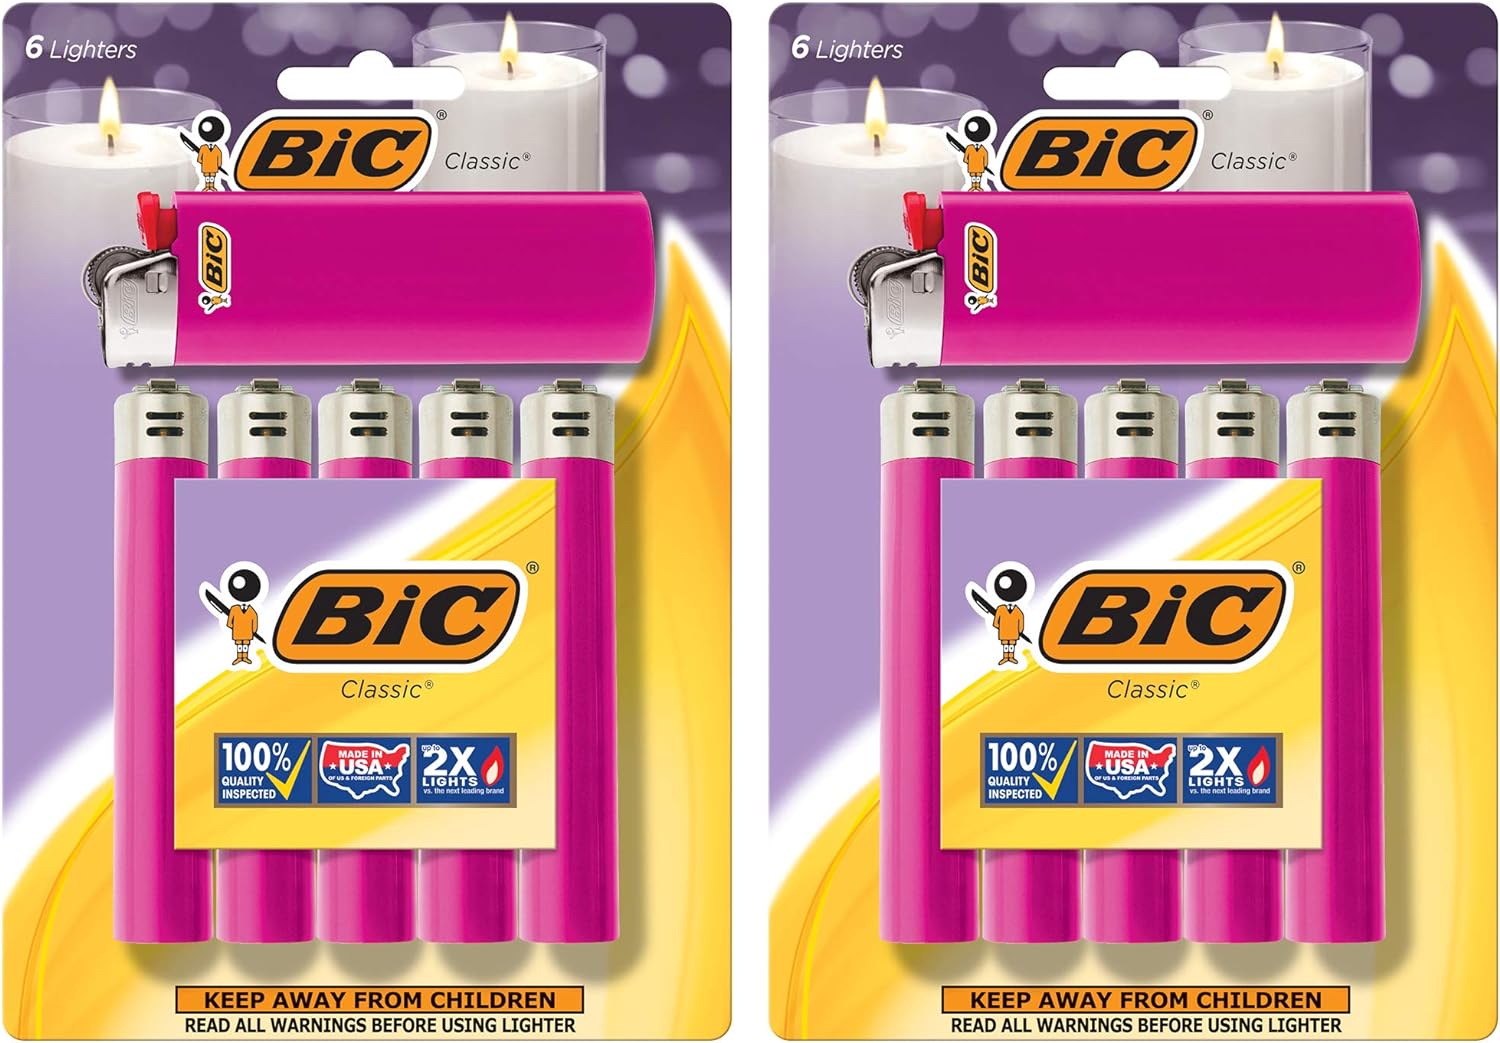 BIC Classic Lighter, Pink, 12-Pack (Packaging May Vary)